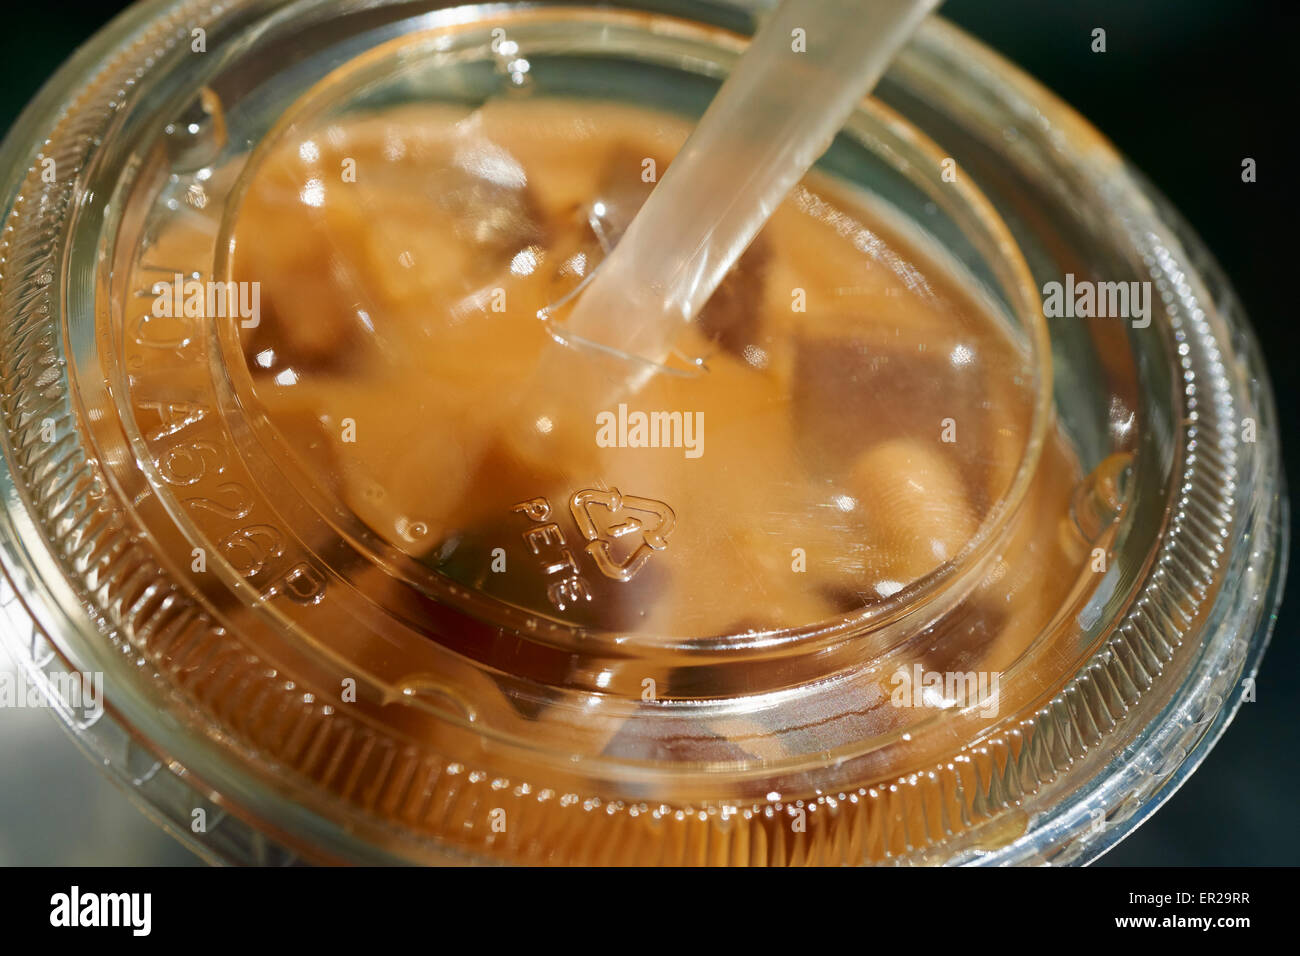 Iced coffee in a plastic container, a typical warm-weather NYC drink packed for street consumption Stock Photo